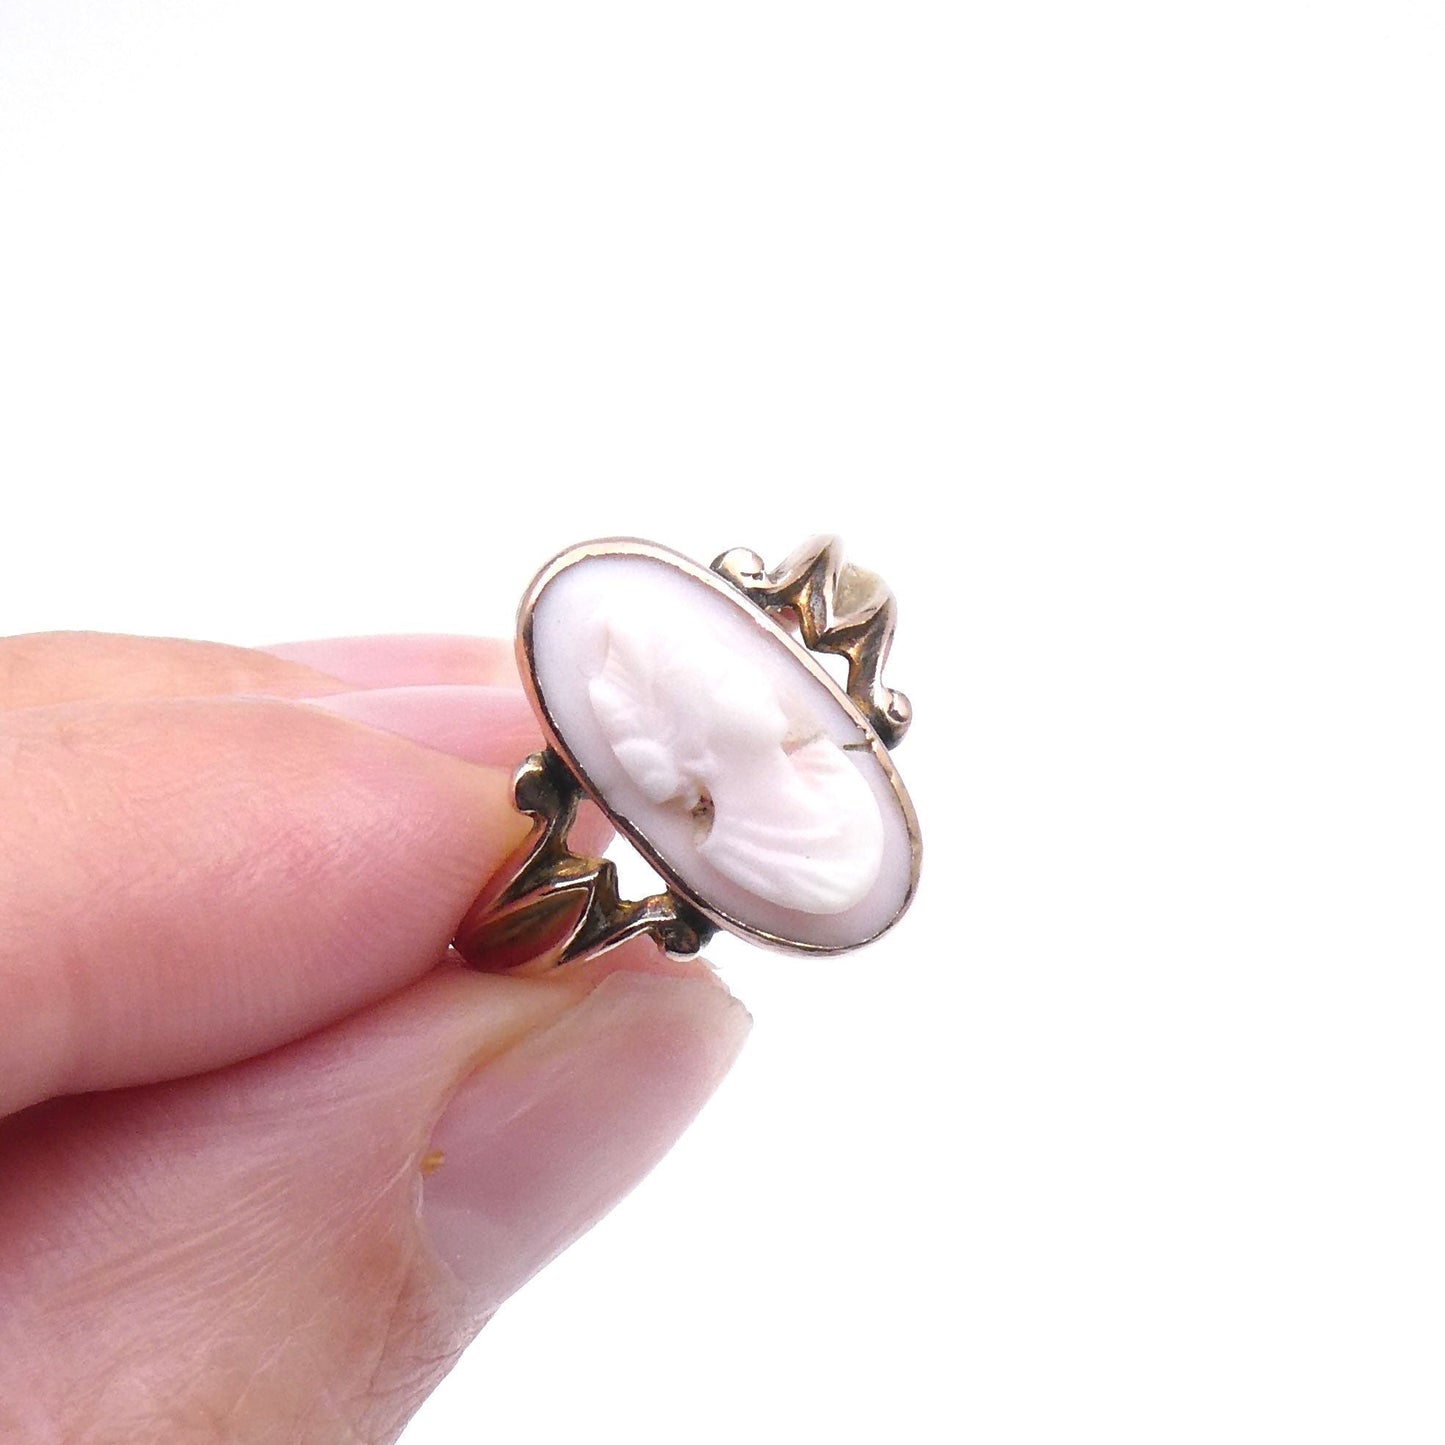 Vintage cameo ring, a lovely vintage conch shell cameo engraved with a portrait. - Collected